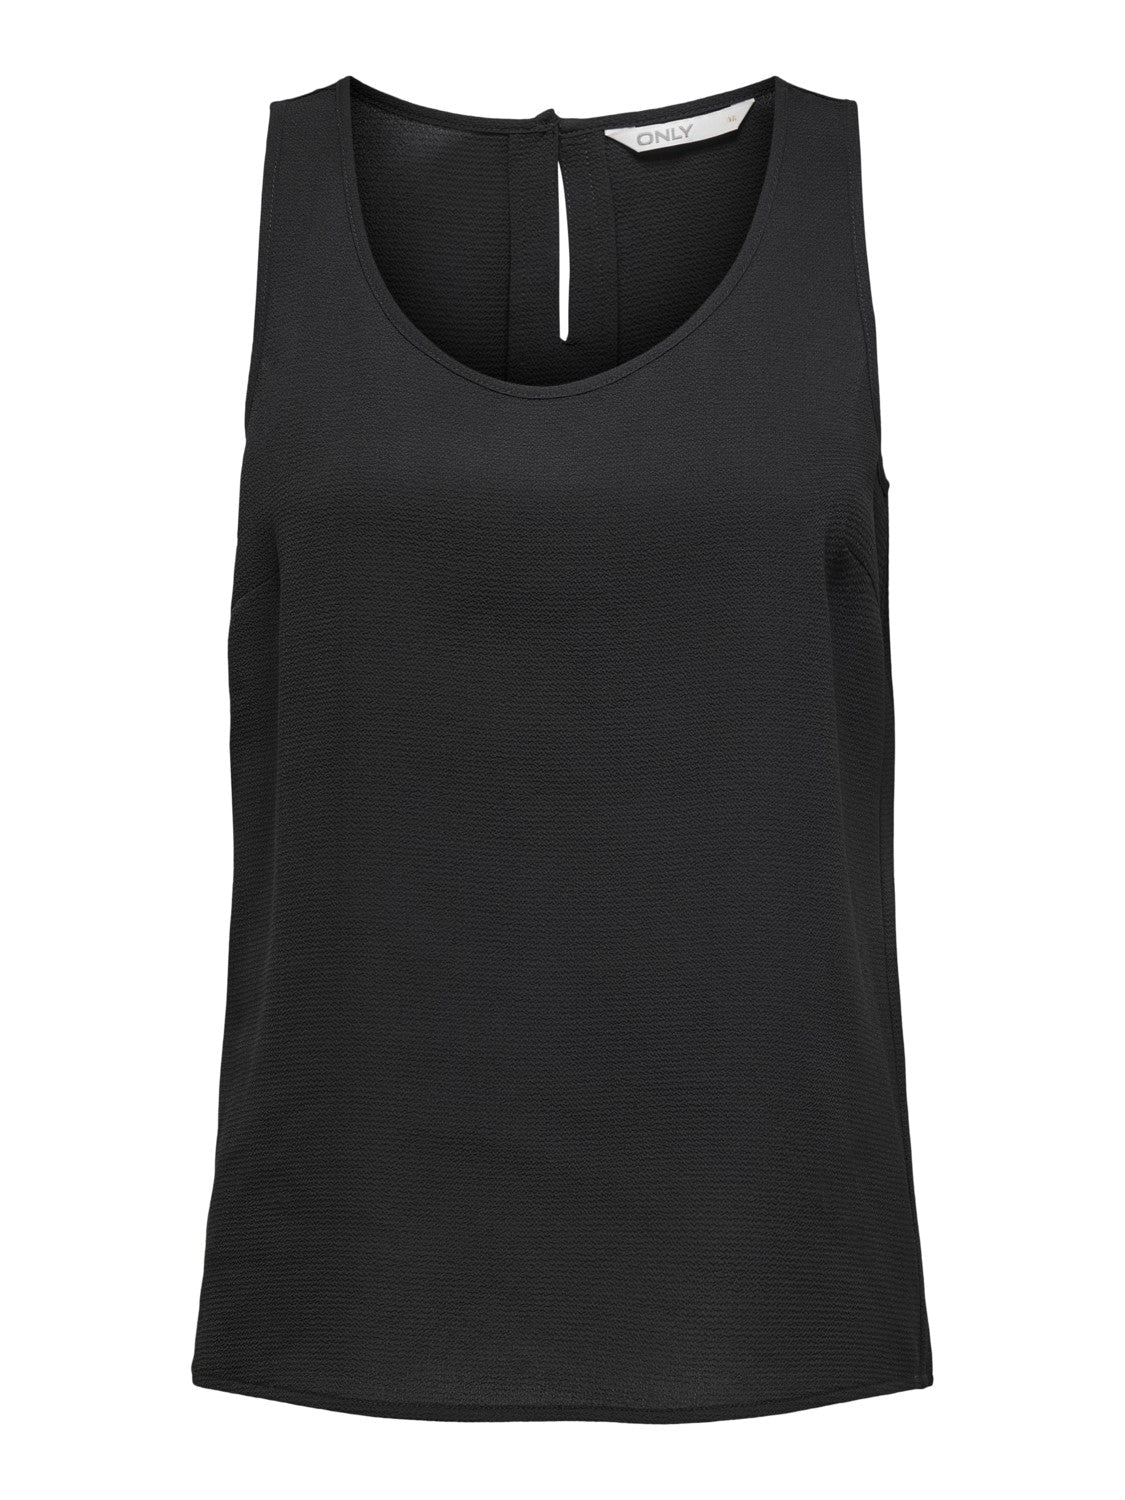 Camisole noire ONLY. 